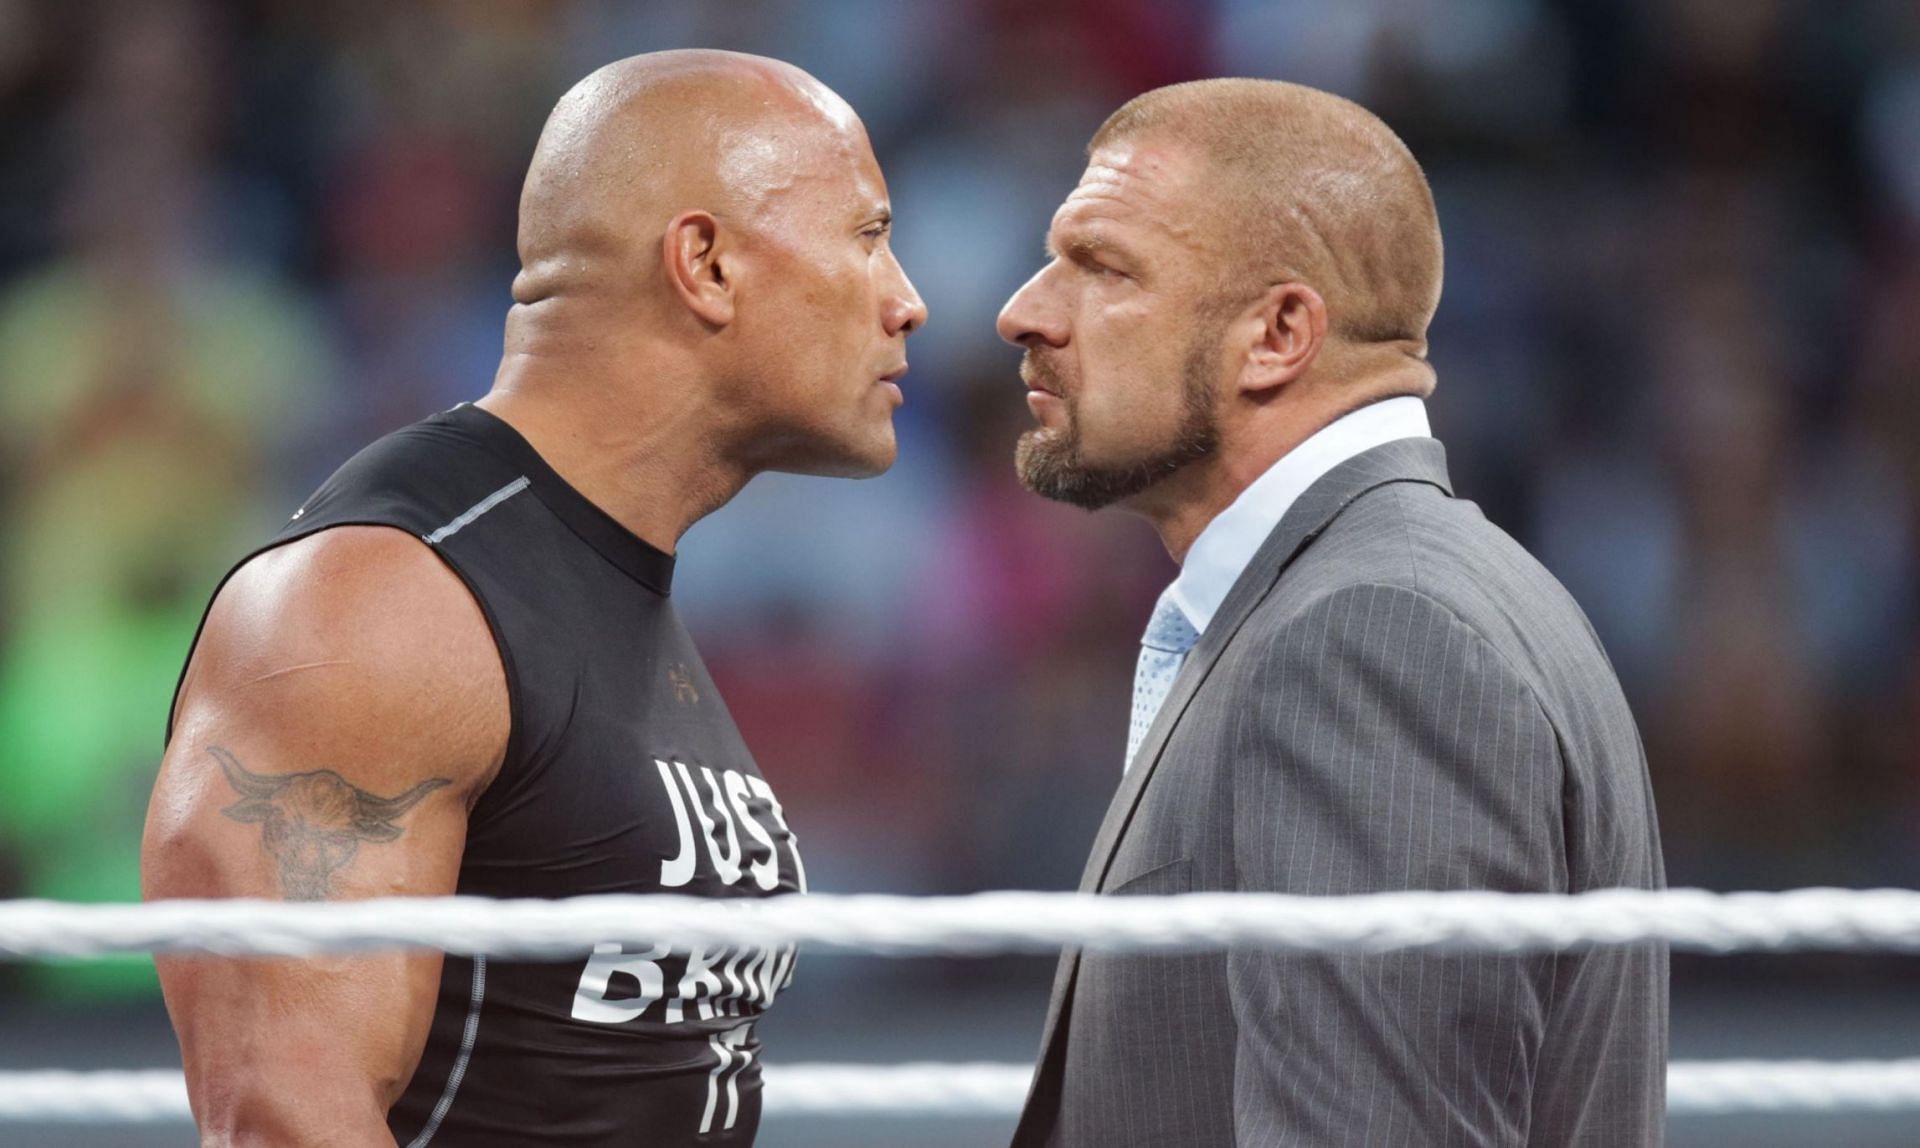 The Rock and Triple H had some great matches during the Attitude Era